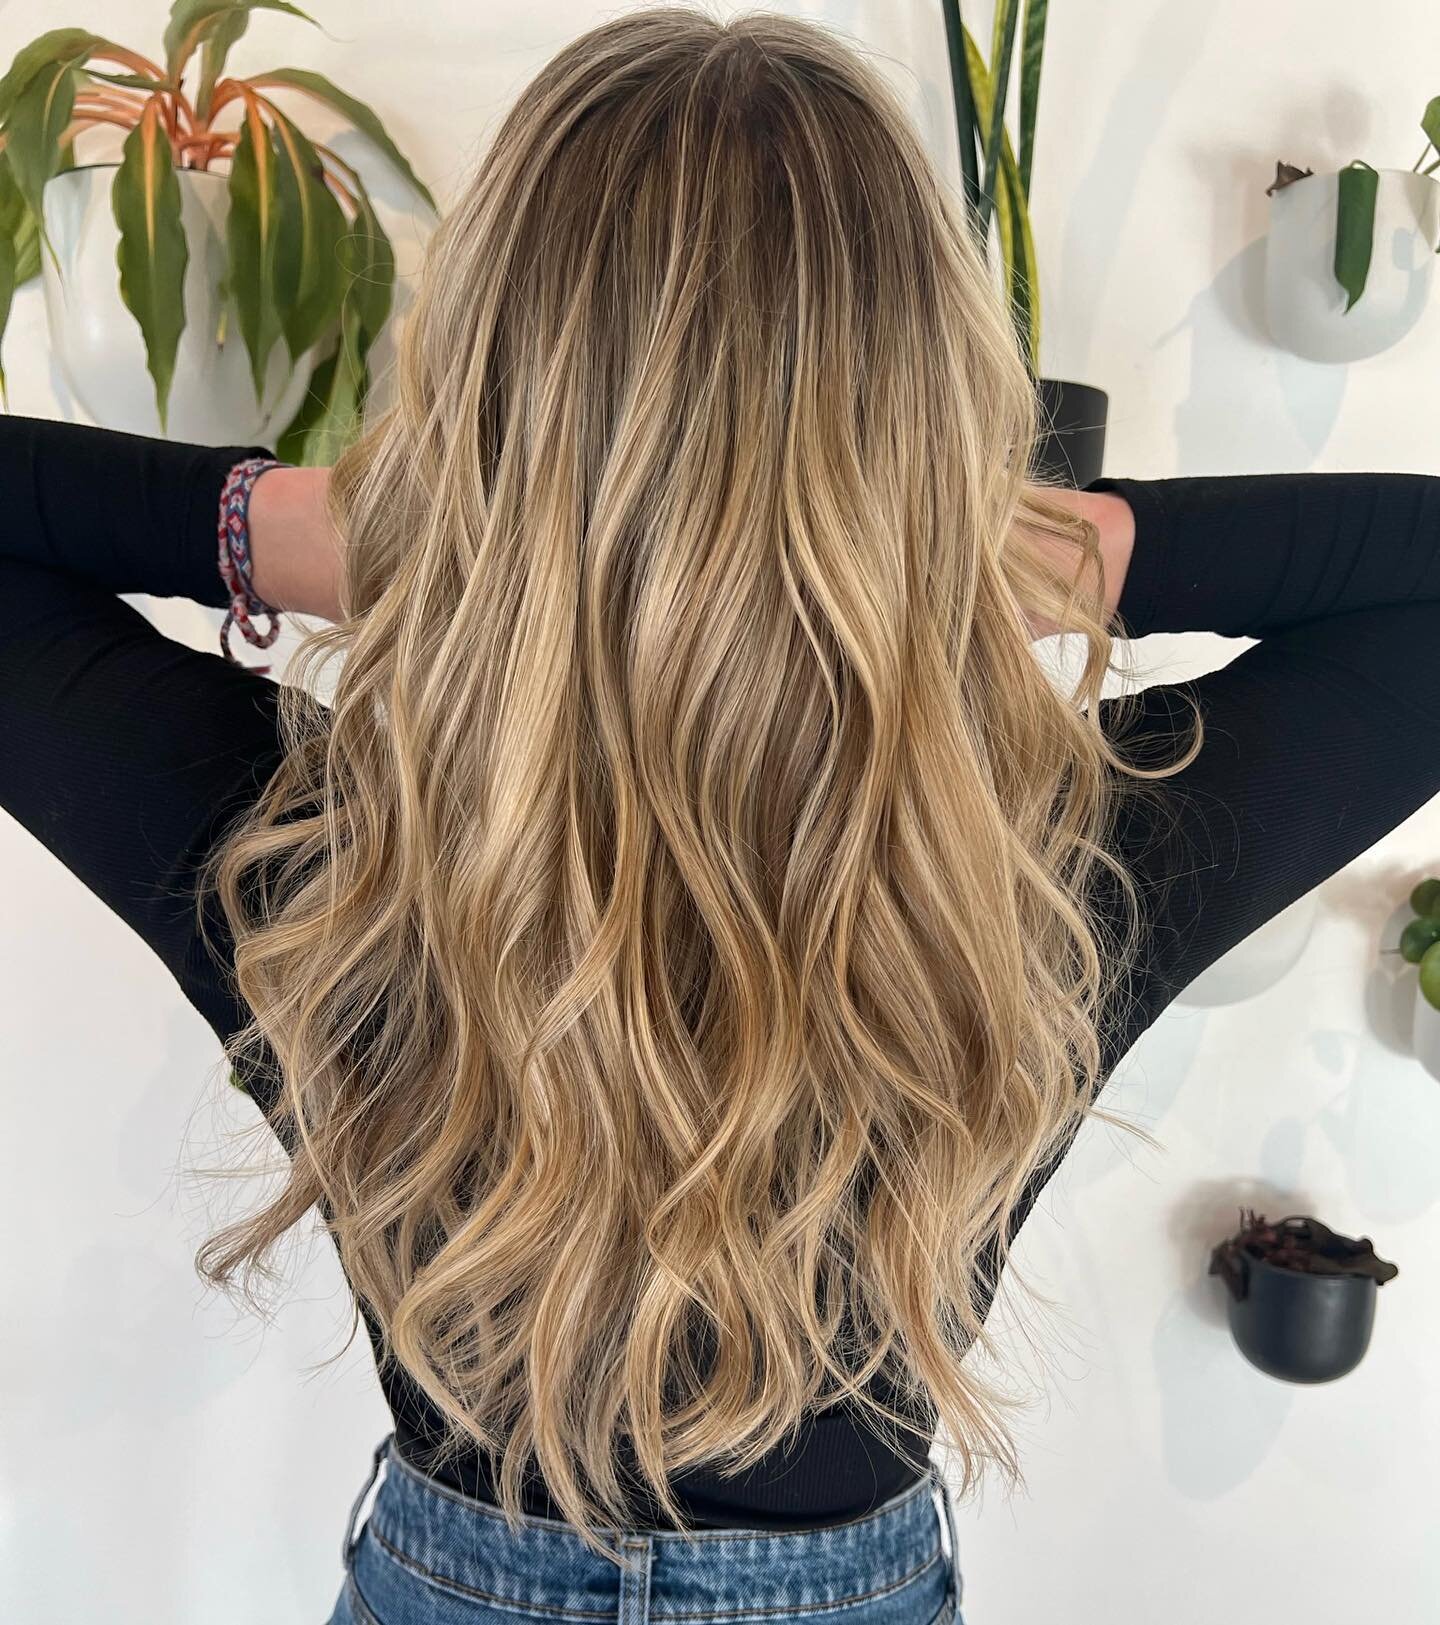 Good hair doesn&rsquo;t stay home on a Friday night! Mmm we are loving this dimensional blonde by Haley!🖤 #evolvebozeman #bozemanhair #goldwell #oribeobsessed #randco #bozeman #hairinspo